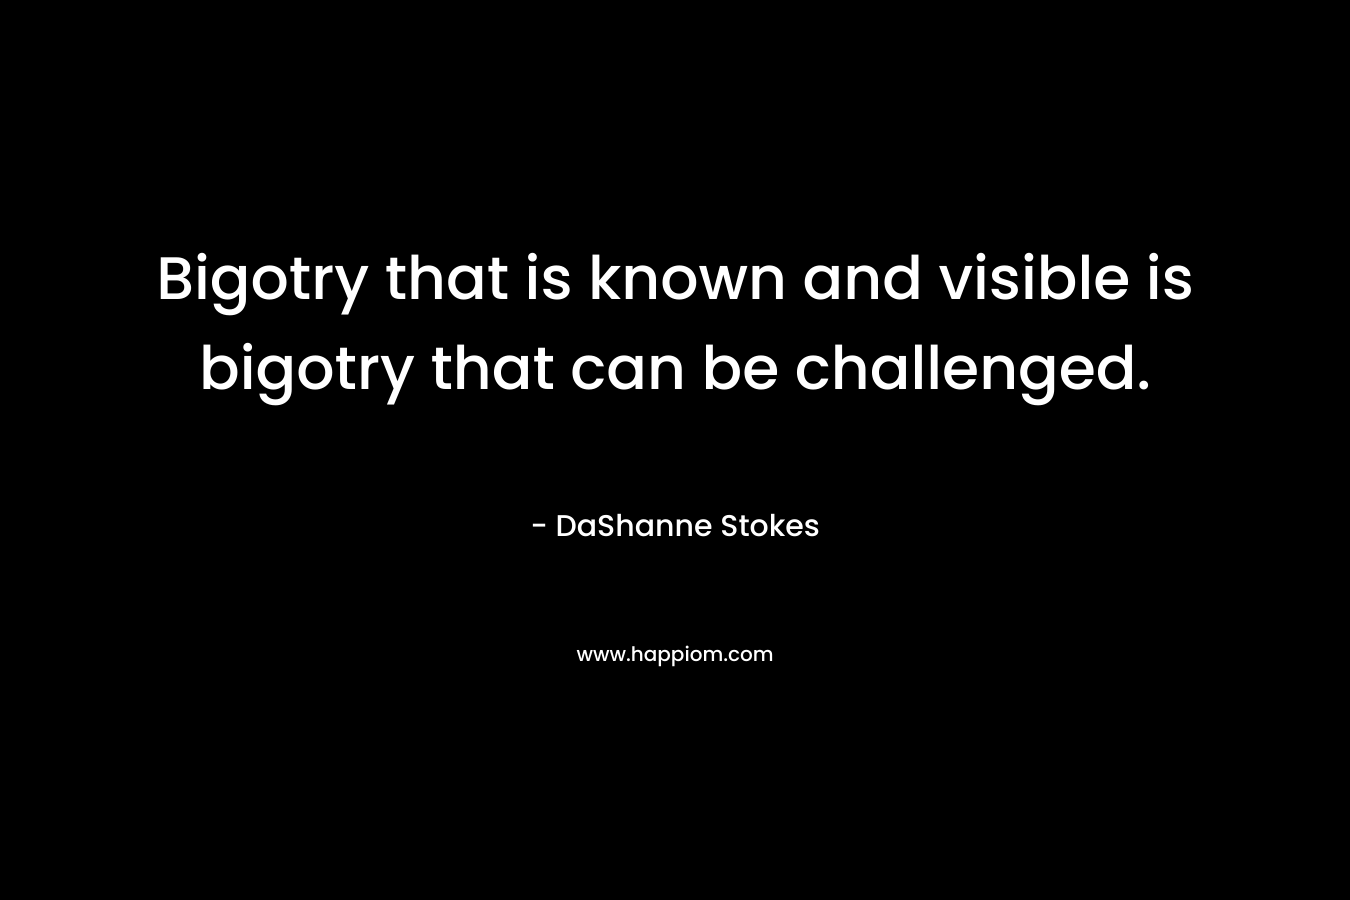 Bigotry that is known and visible is bigotry that can be challenged. – DaShanne Stokes